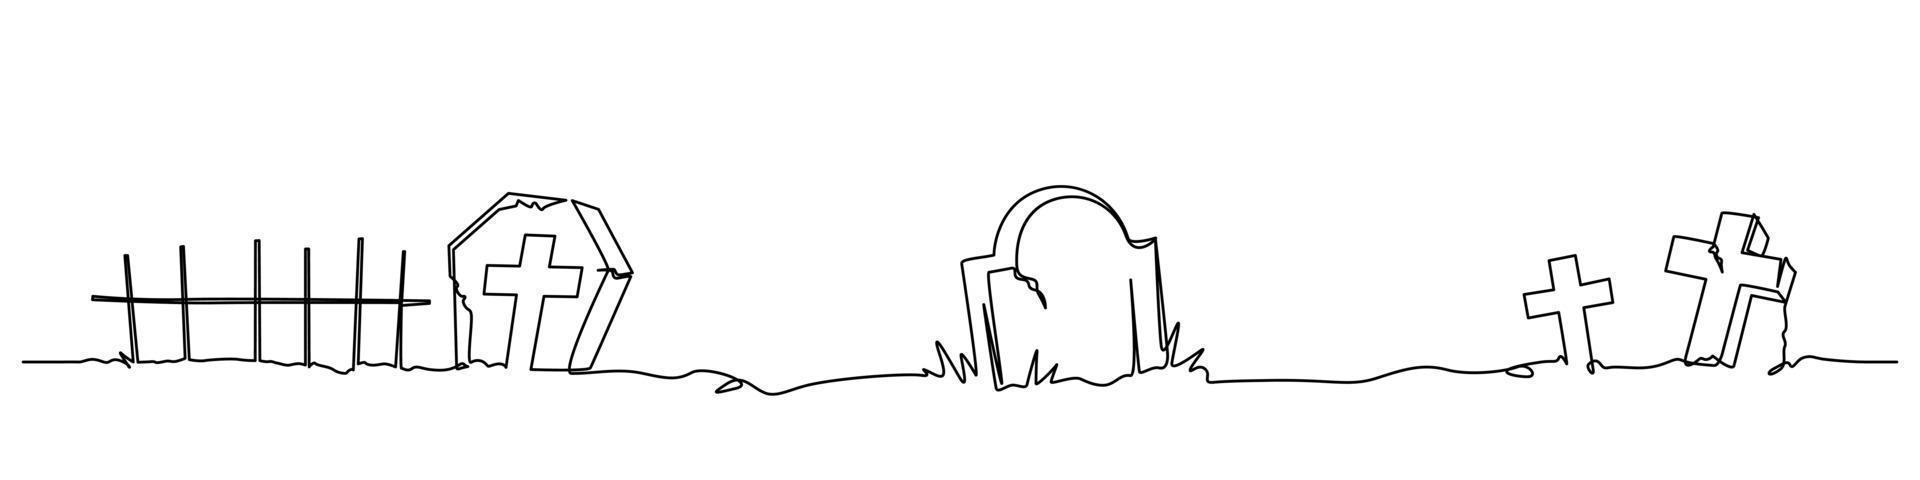 scary night cemetery in continuous line drawing style vector